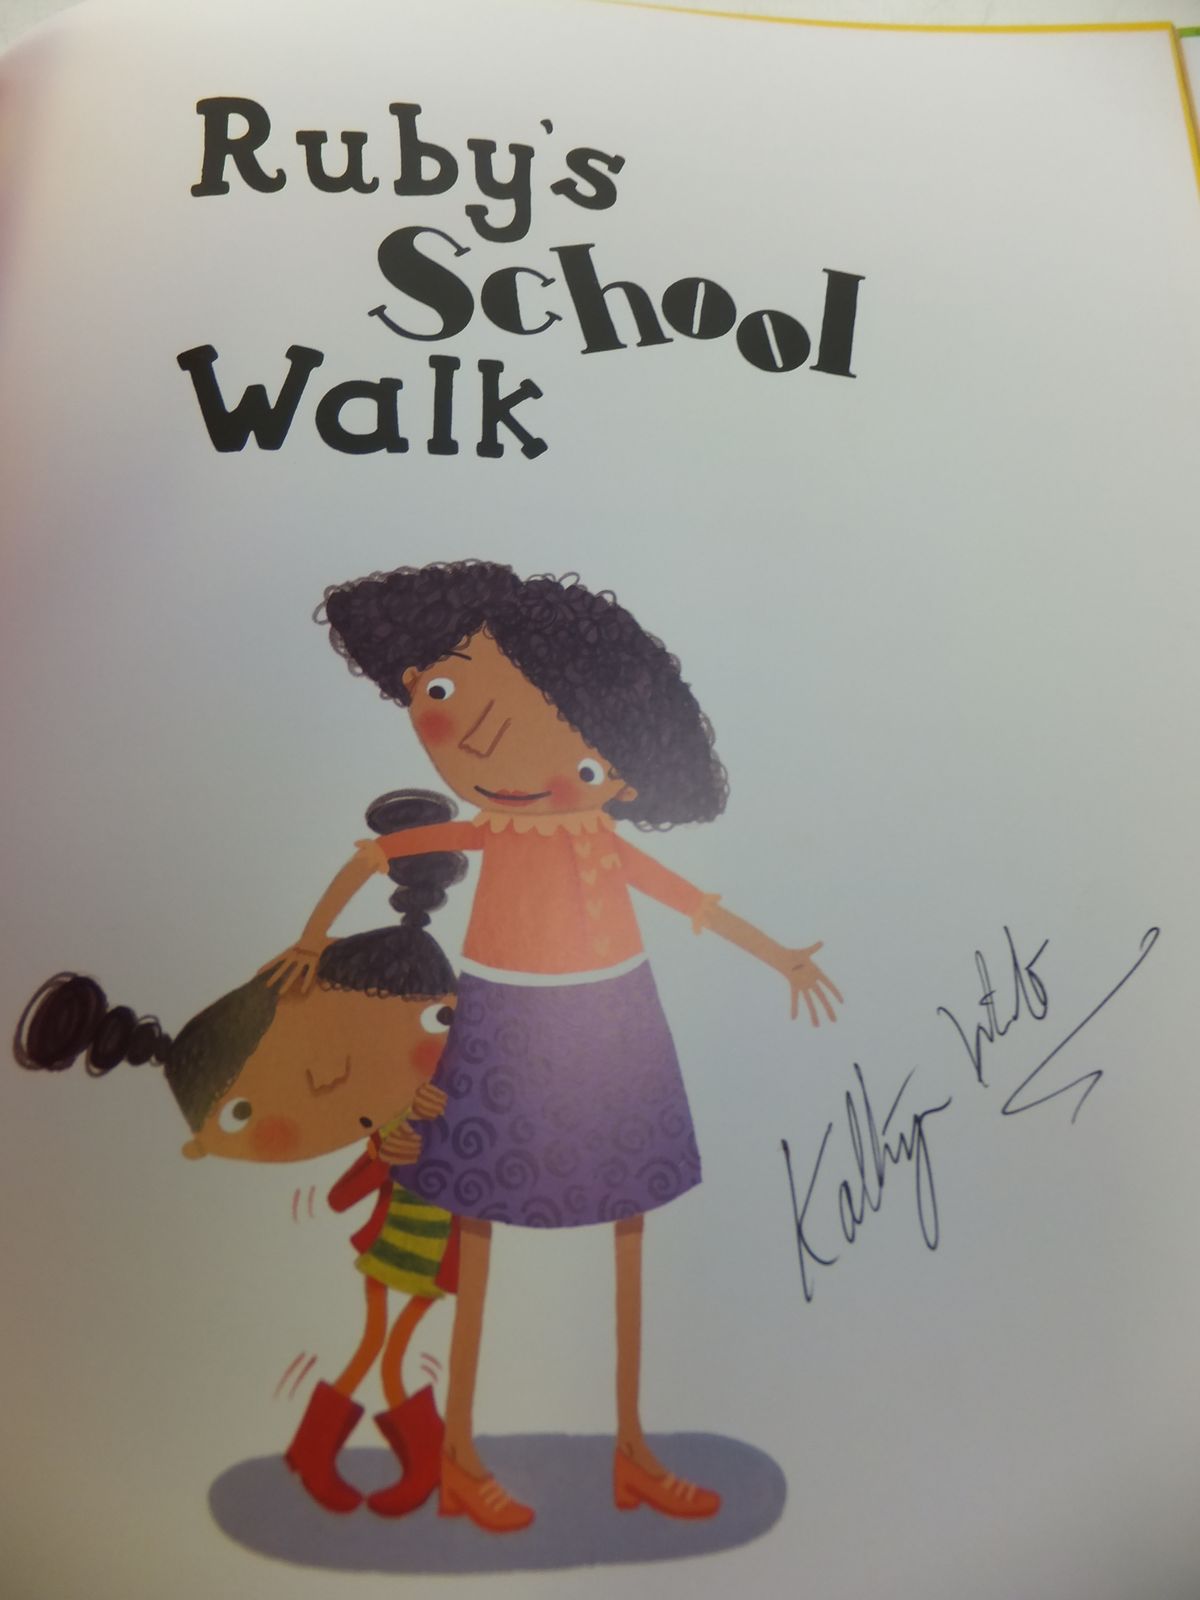 Photo of RUBY'S SCHOOL WALK written by White, Kathryn illustrated by Latimer, Miriam published by Barefoot Books (STOCK CODE: 1807937)  for sale by Stella & Rose's Books